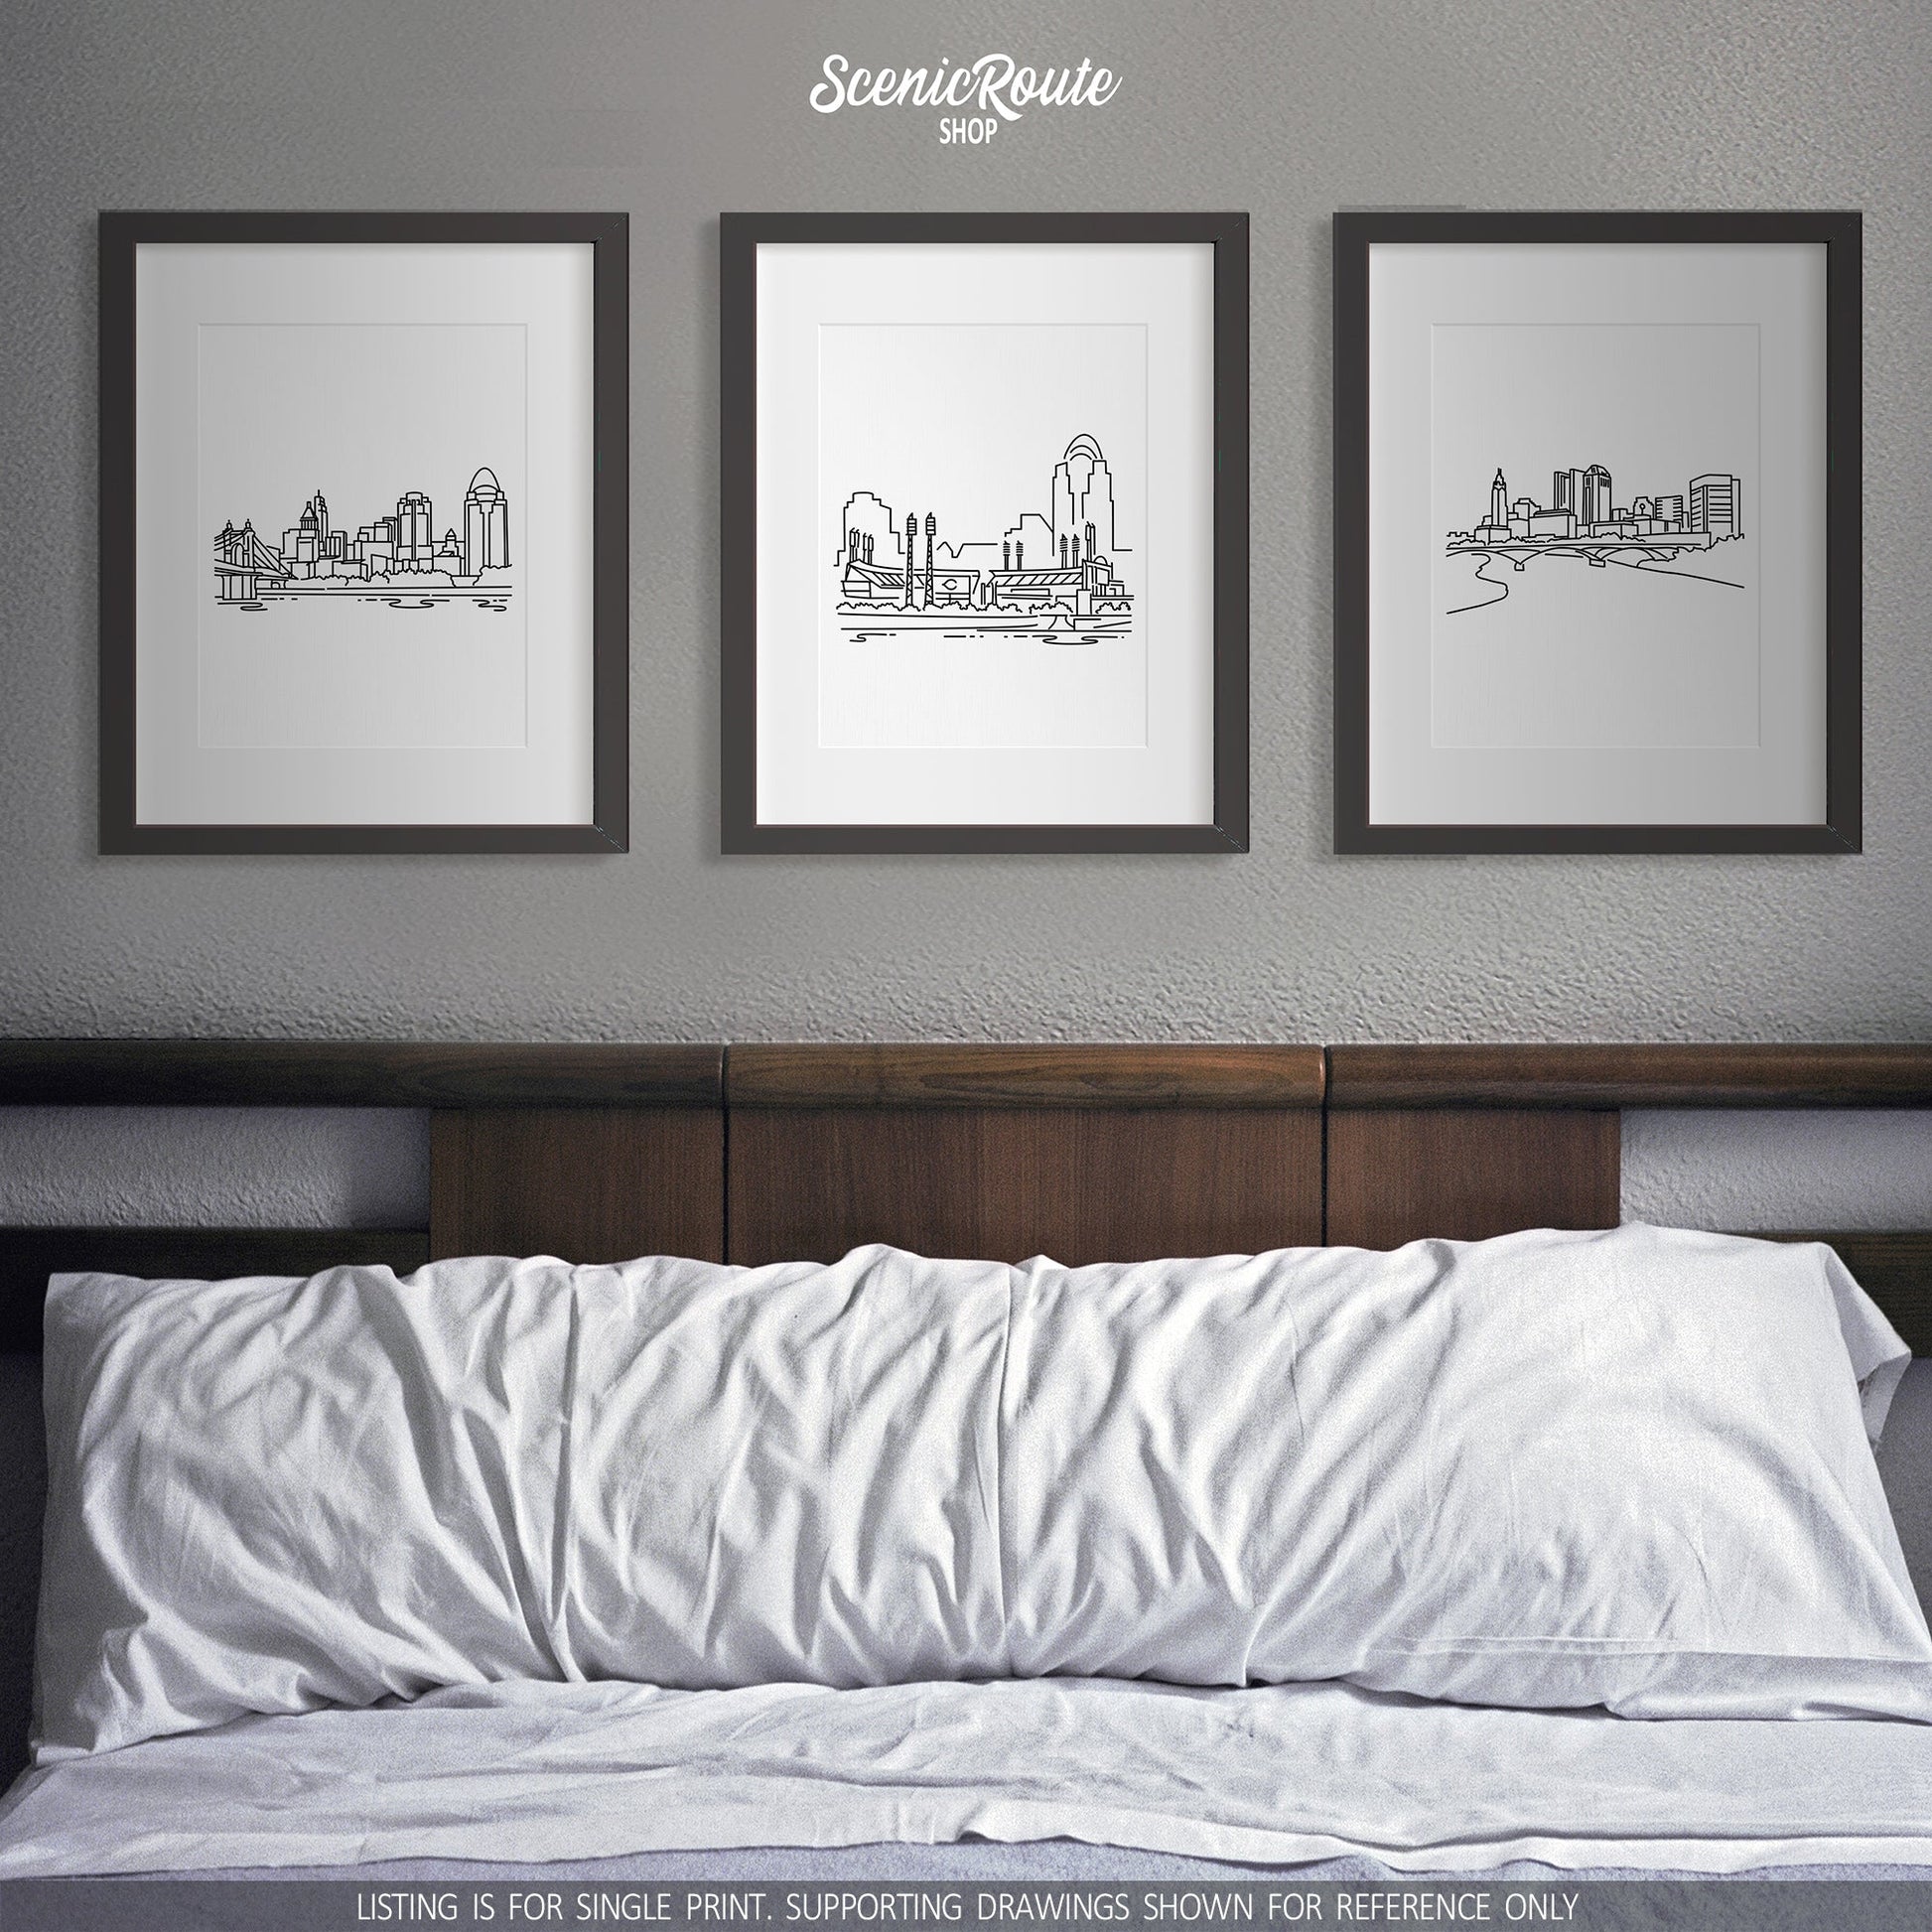 A group of three framed drawings on a white wall above a bed. The line art drawings include the Cincinnati Skyline, Cincinnati Reds Ballpark, and Columbus Skyline